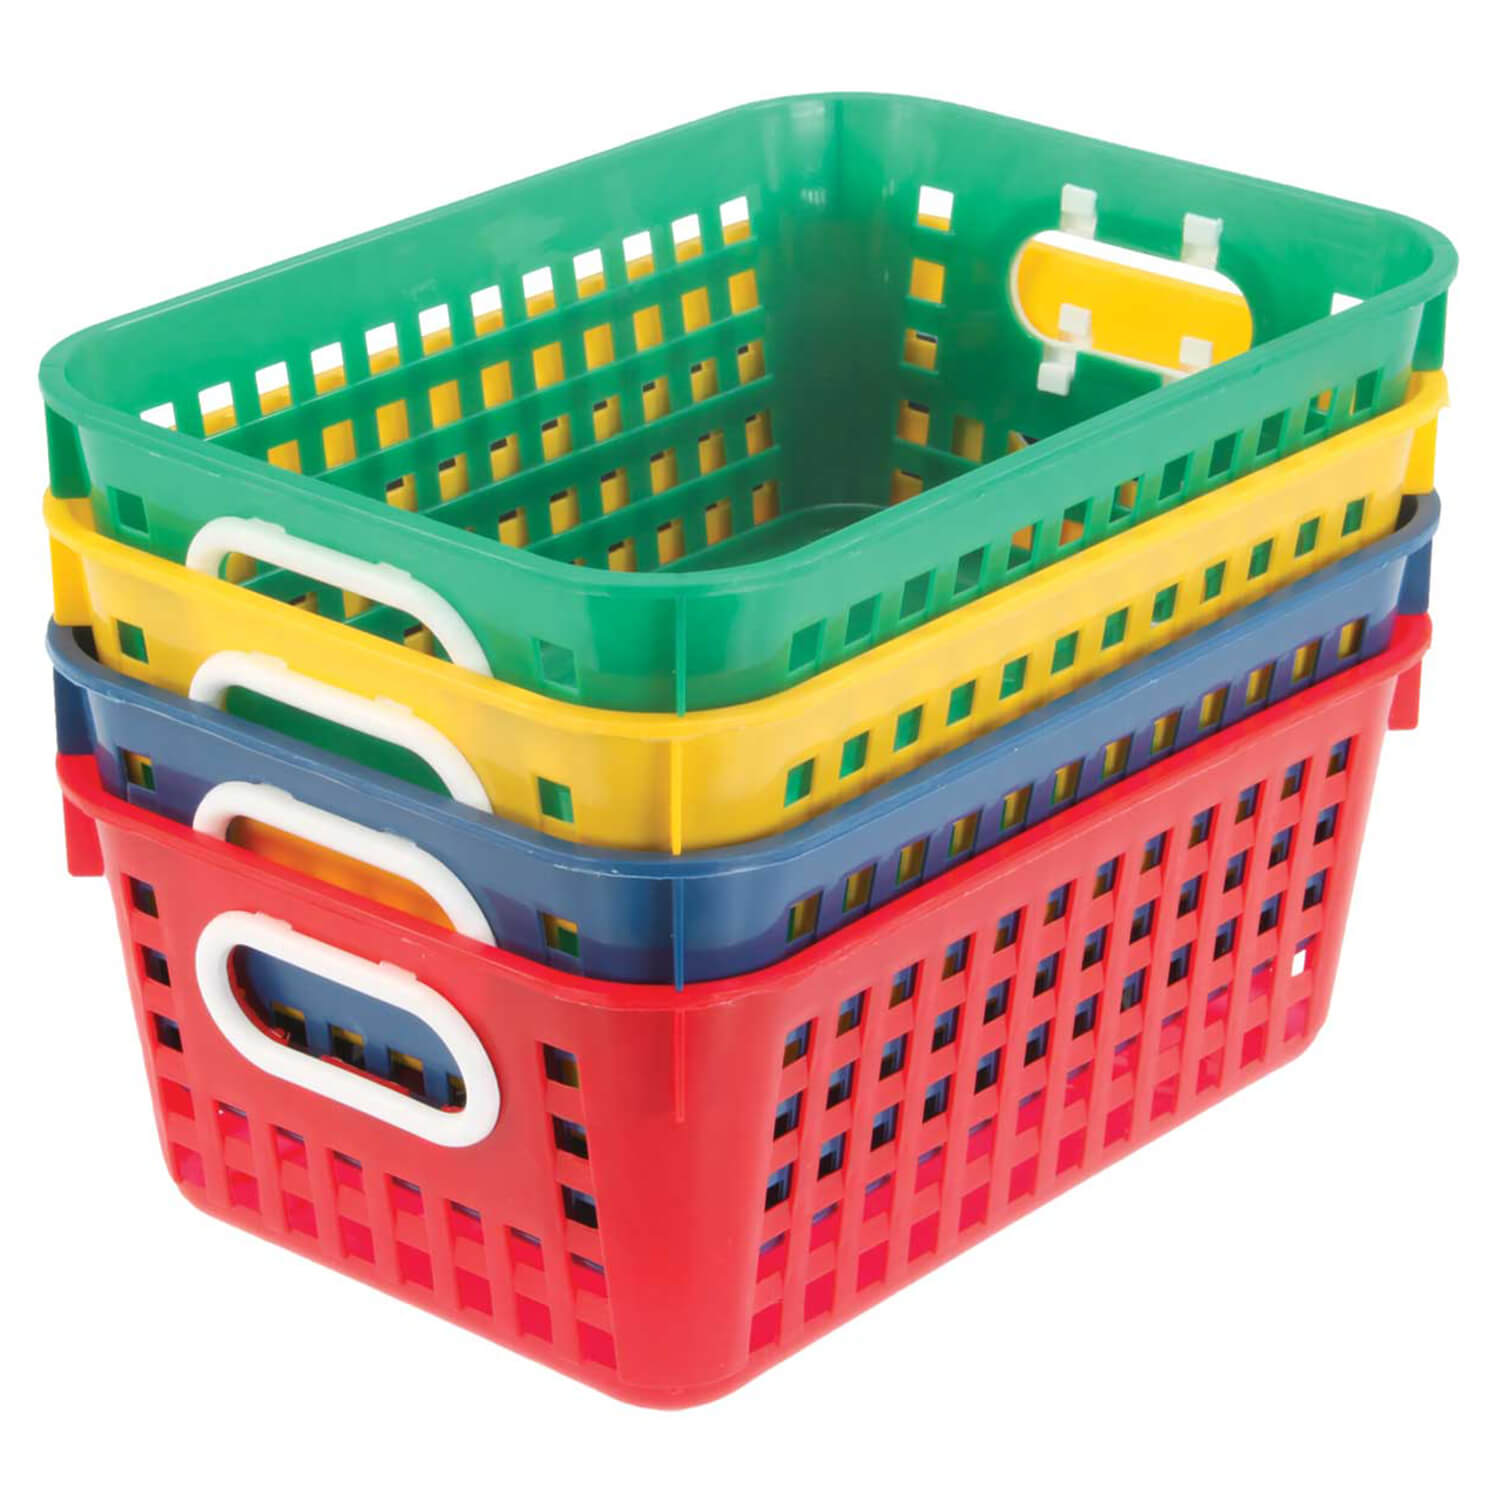 W16485224 Classroom Storage Tall Baskets With Handles - 6 Pc.